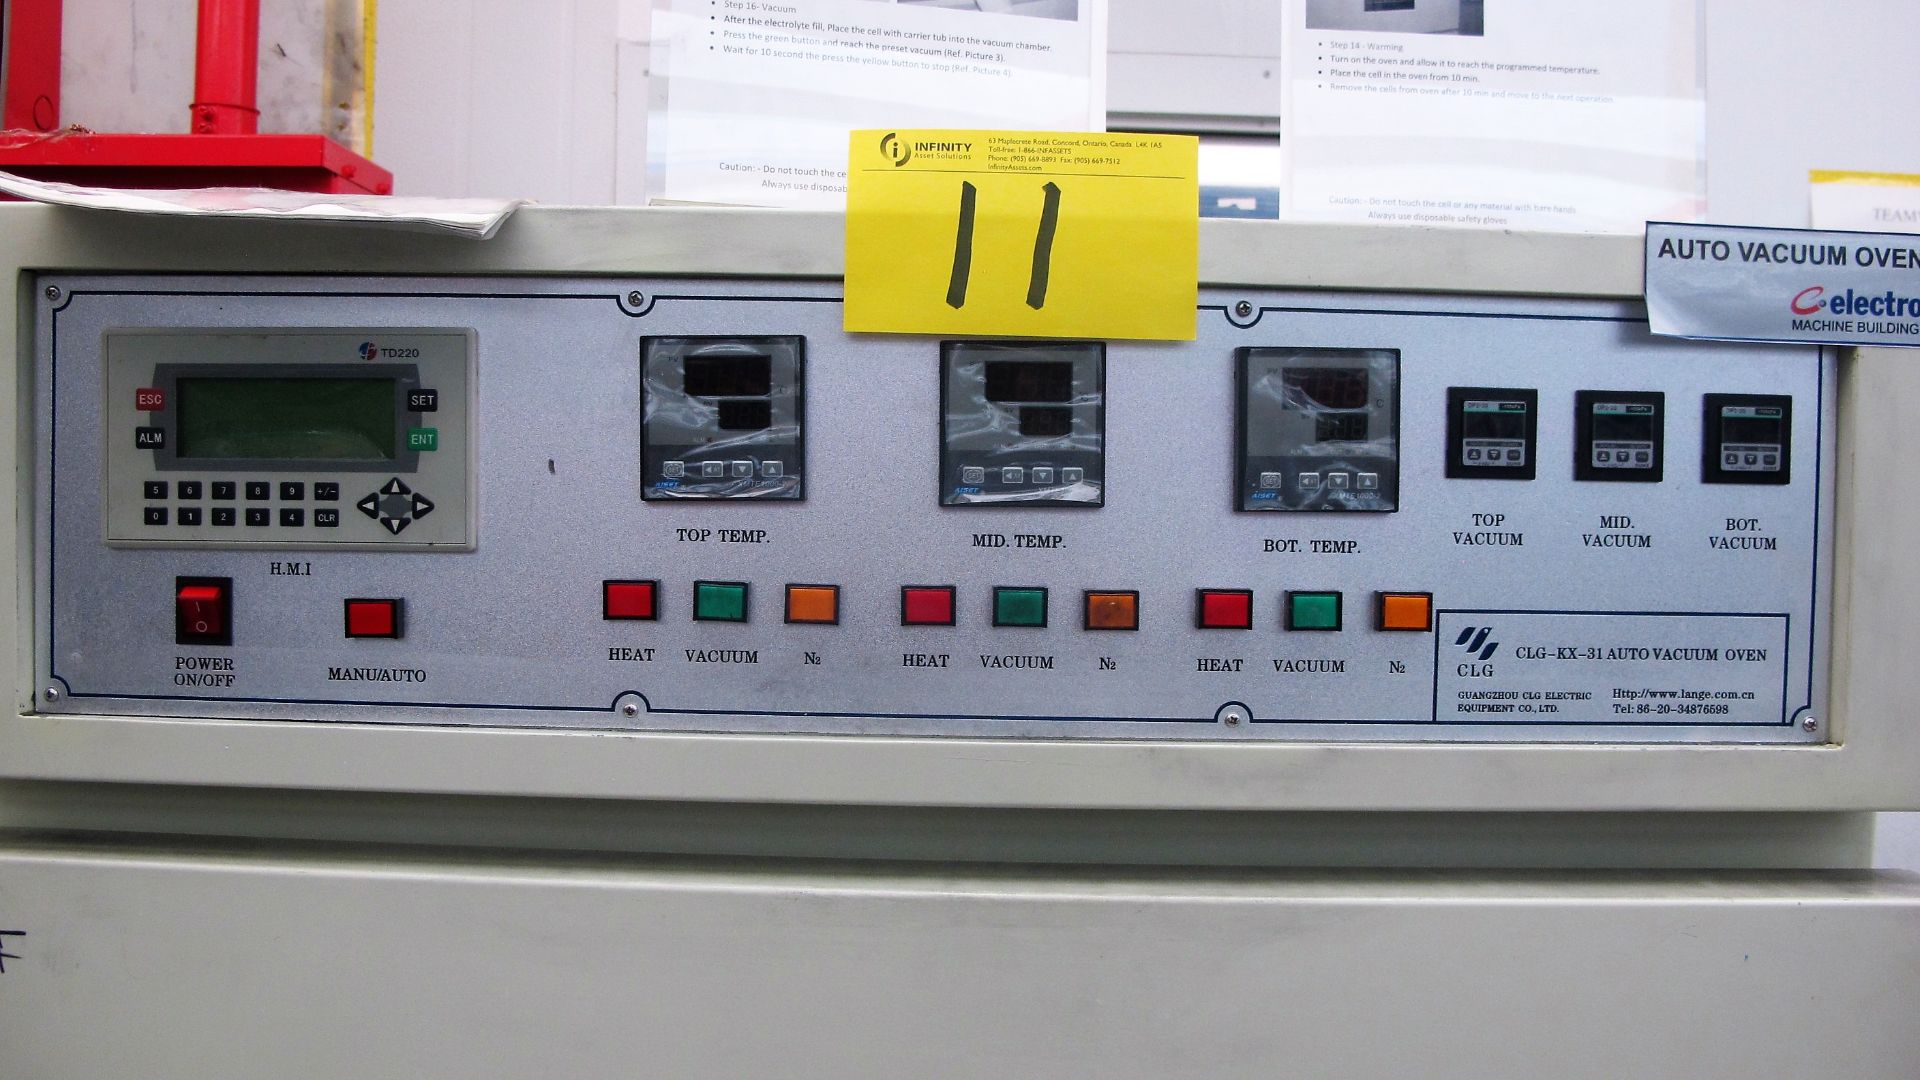 CLG-KX-31 AUTO VACUUM OVEN (3 CHAMBERS) TD220 DIGITAL CONTROL - Image 3 of 3